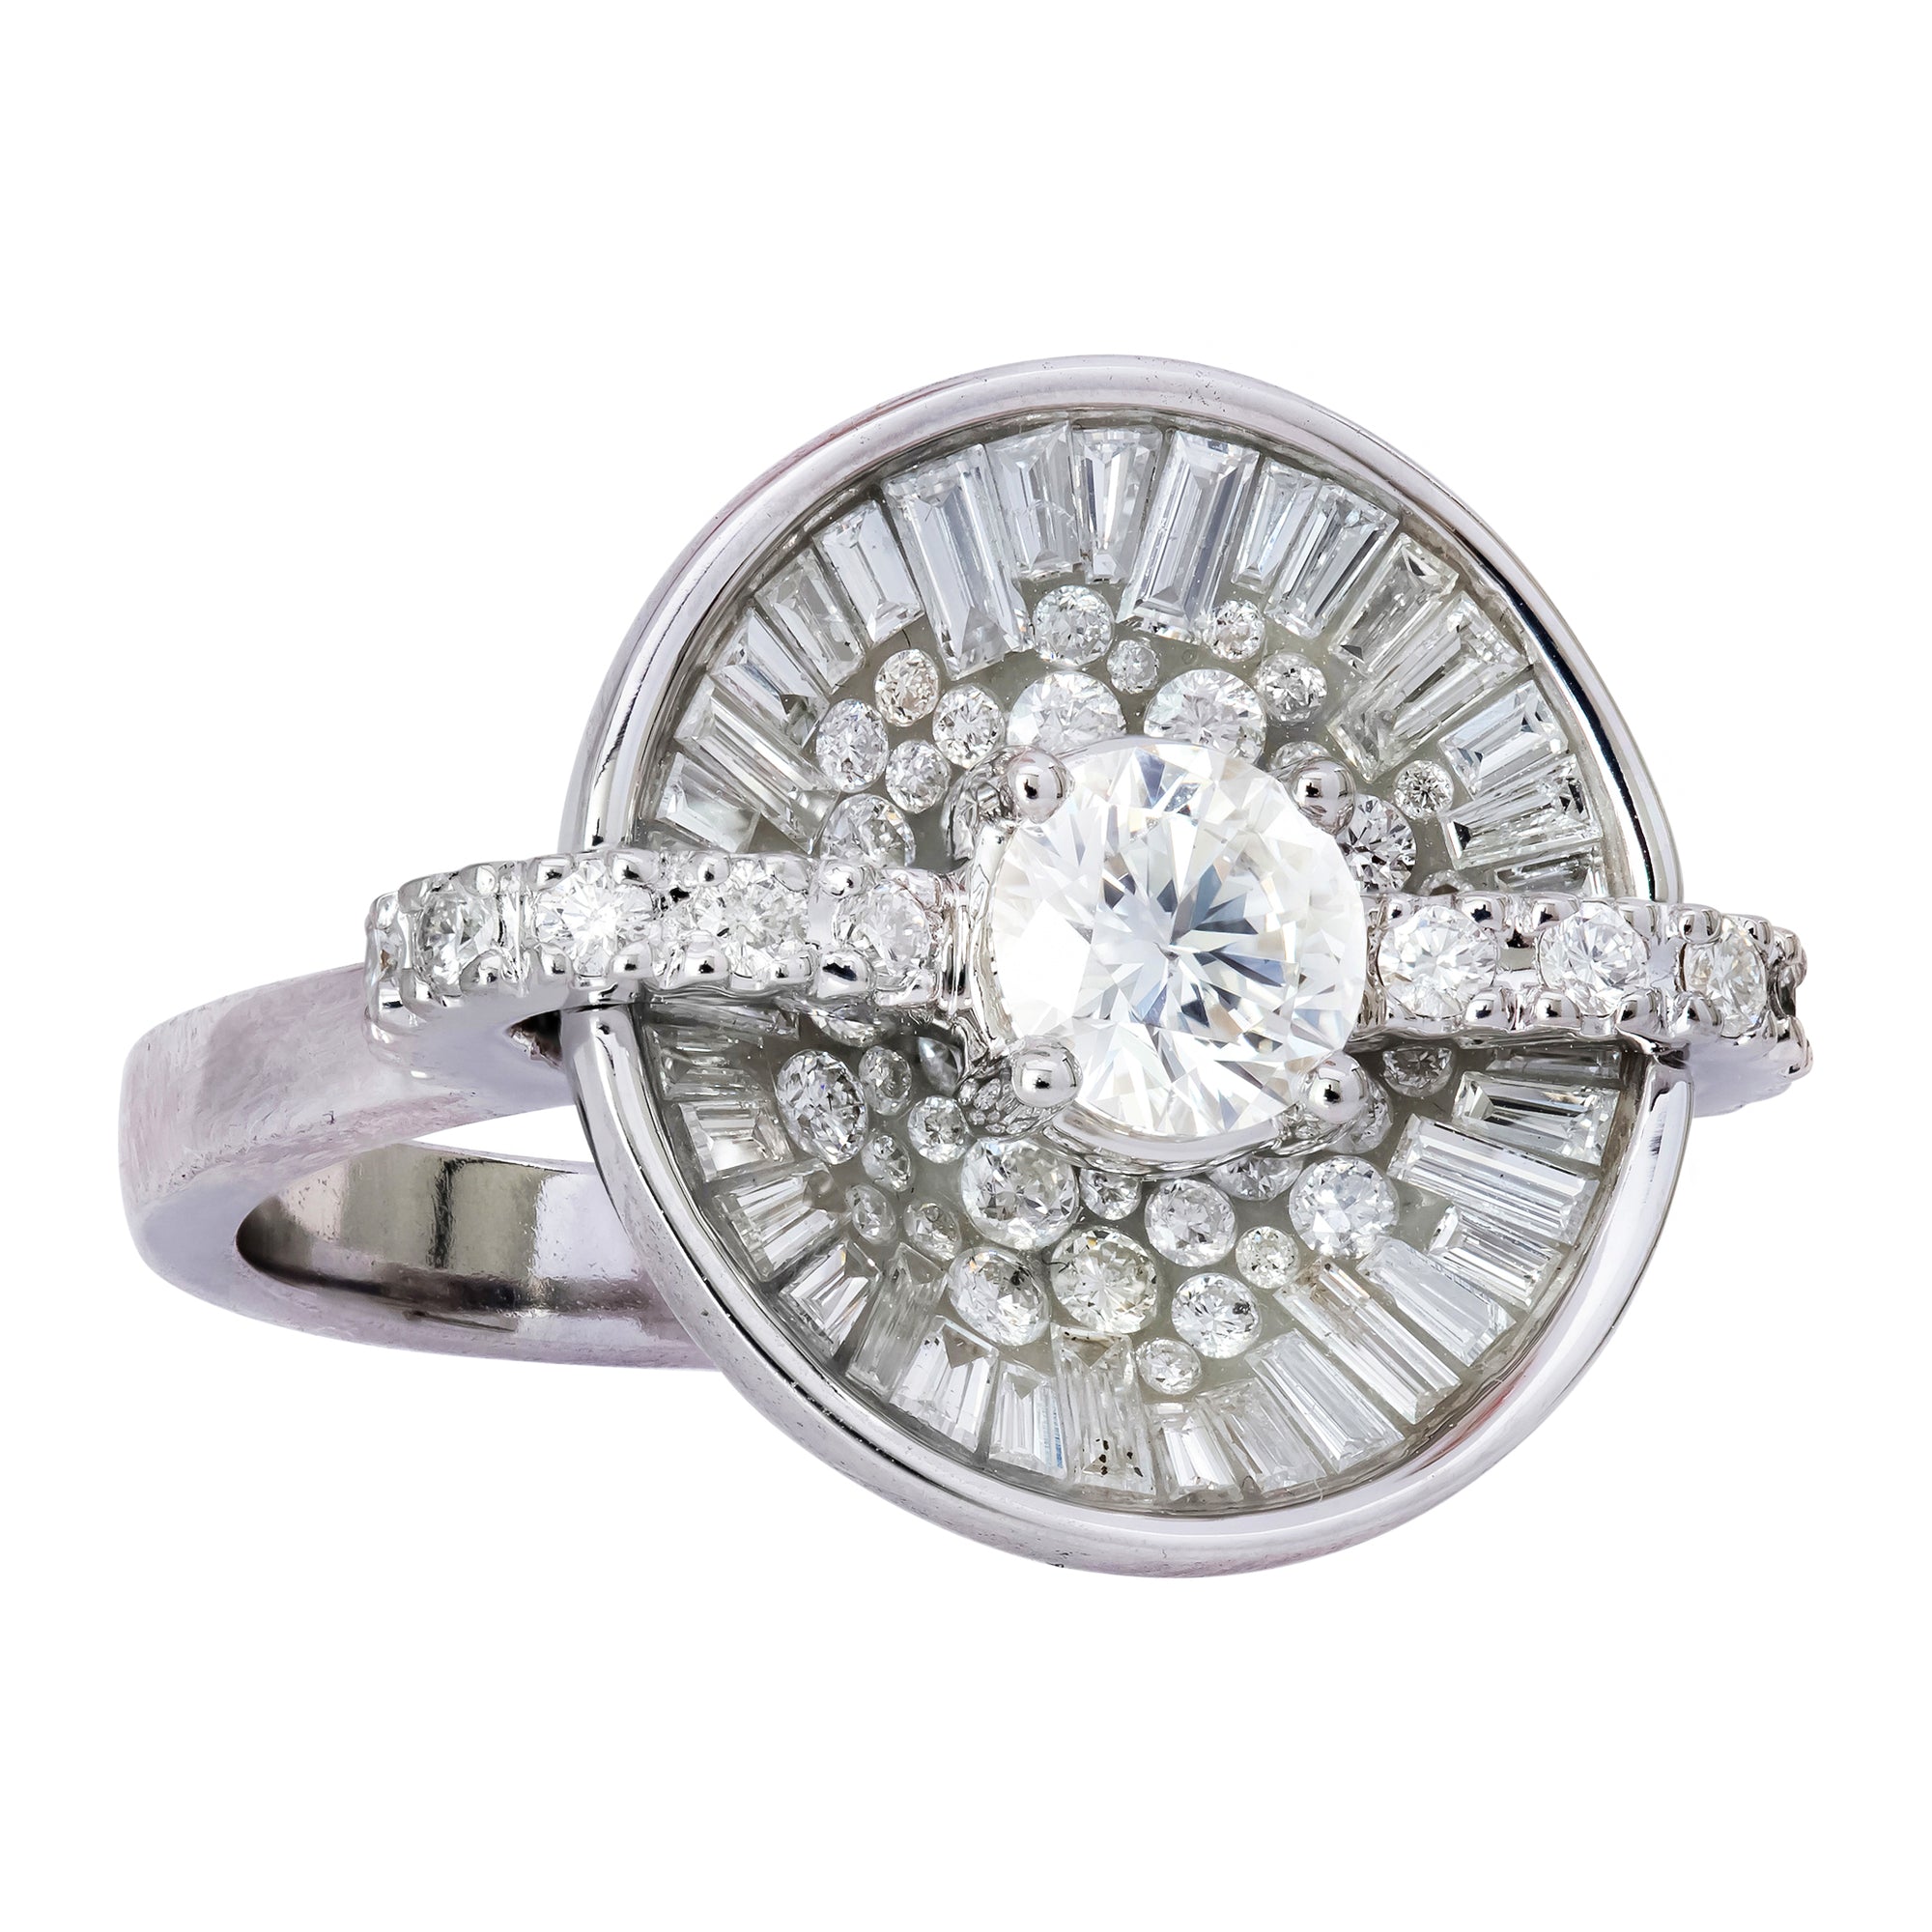 White Diamond Opus Ring by Pleve available at Talisman Collection Fine Jewelers in El Dorado Hills, CA and online. Specs: 1.70 ct white diamonds, .50ct brilliant round center diamond, 18k white gold. 